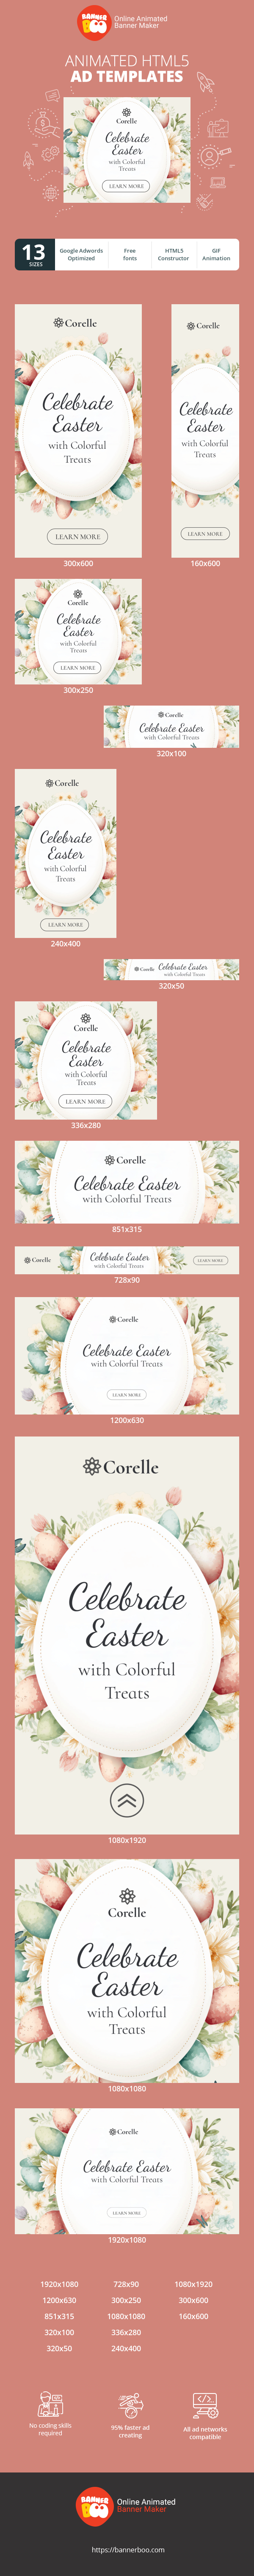 Banner ad template — Celebrate Easter With Colorful Treats — Easter